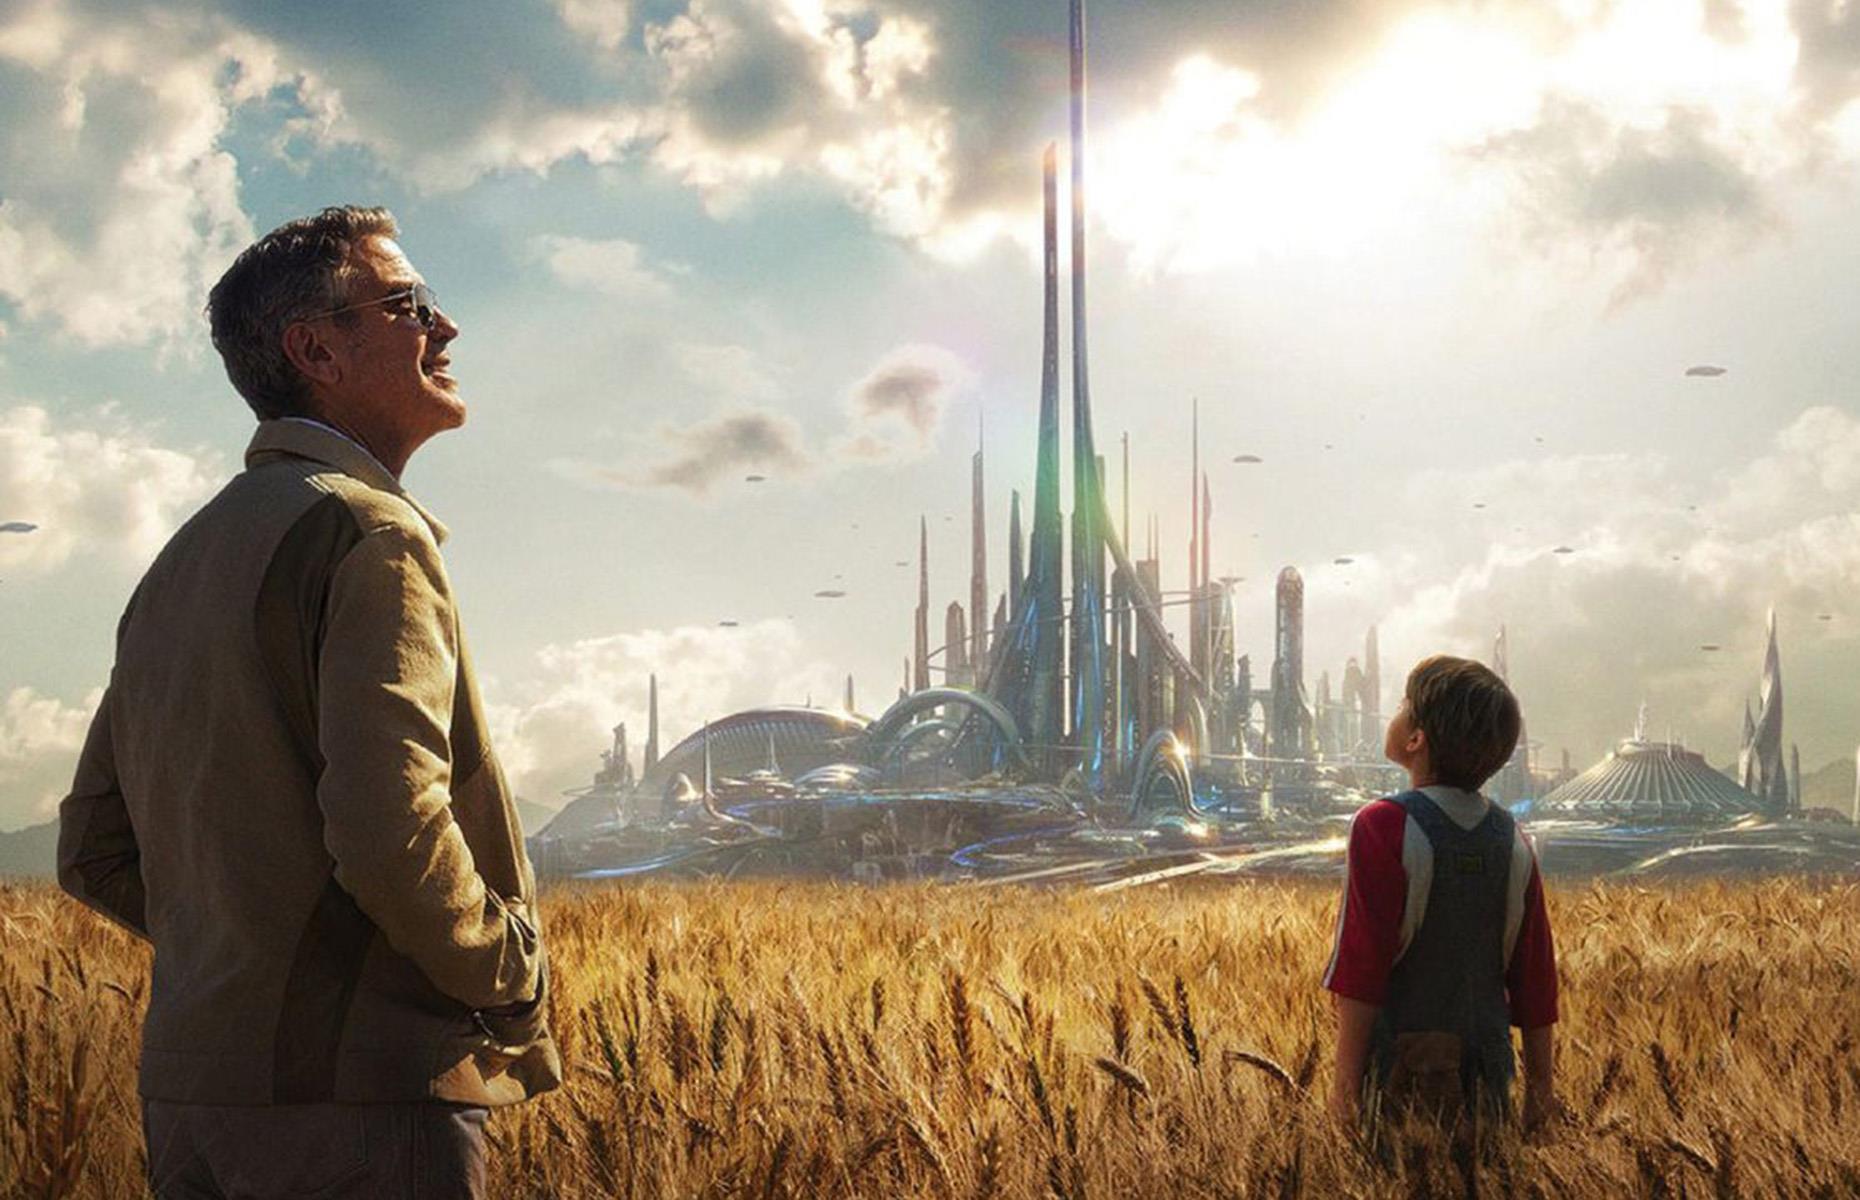 <p>The 2015 adventure saga <em>Tomorrowland</em> seemed destined for silver-screen success. It was based on a beloved Disney theme park attraction, boasted the star power of George Clooney, and had a budget of $190 million behind it.</p>  <p>In a surprising turn of events, the movie earned just $209 million globally upon its release, with a poor marketing campaign once again blamed for failing to draw in audiences.</p>  <p>While technically making a modest profit against its production budget, it's thought the film lost Disney between $170 million and $266 million when other costs are factored in. </p>